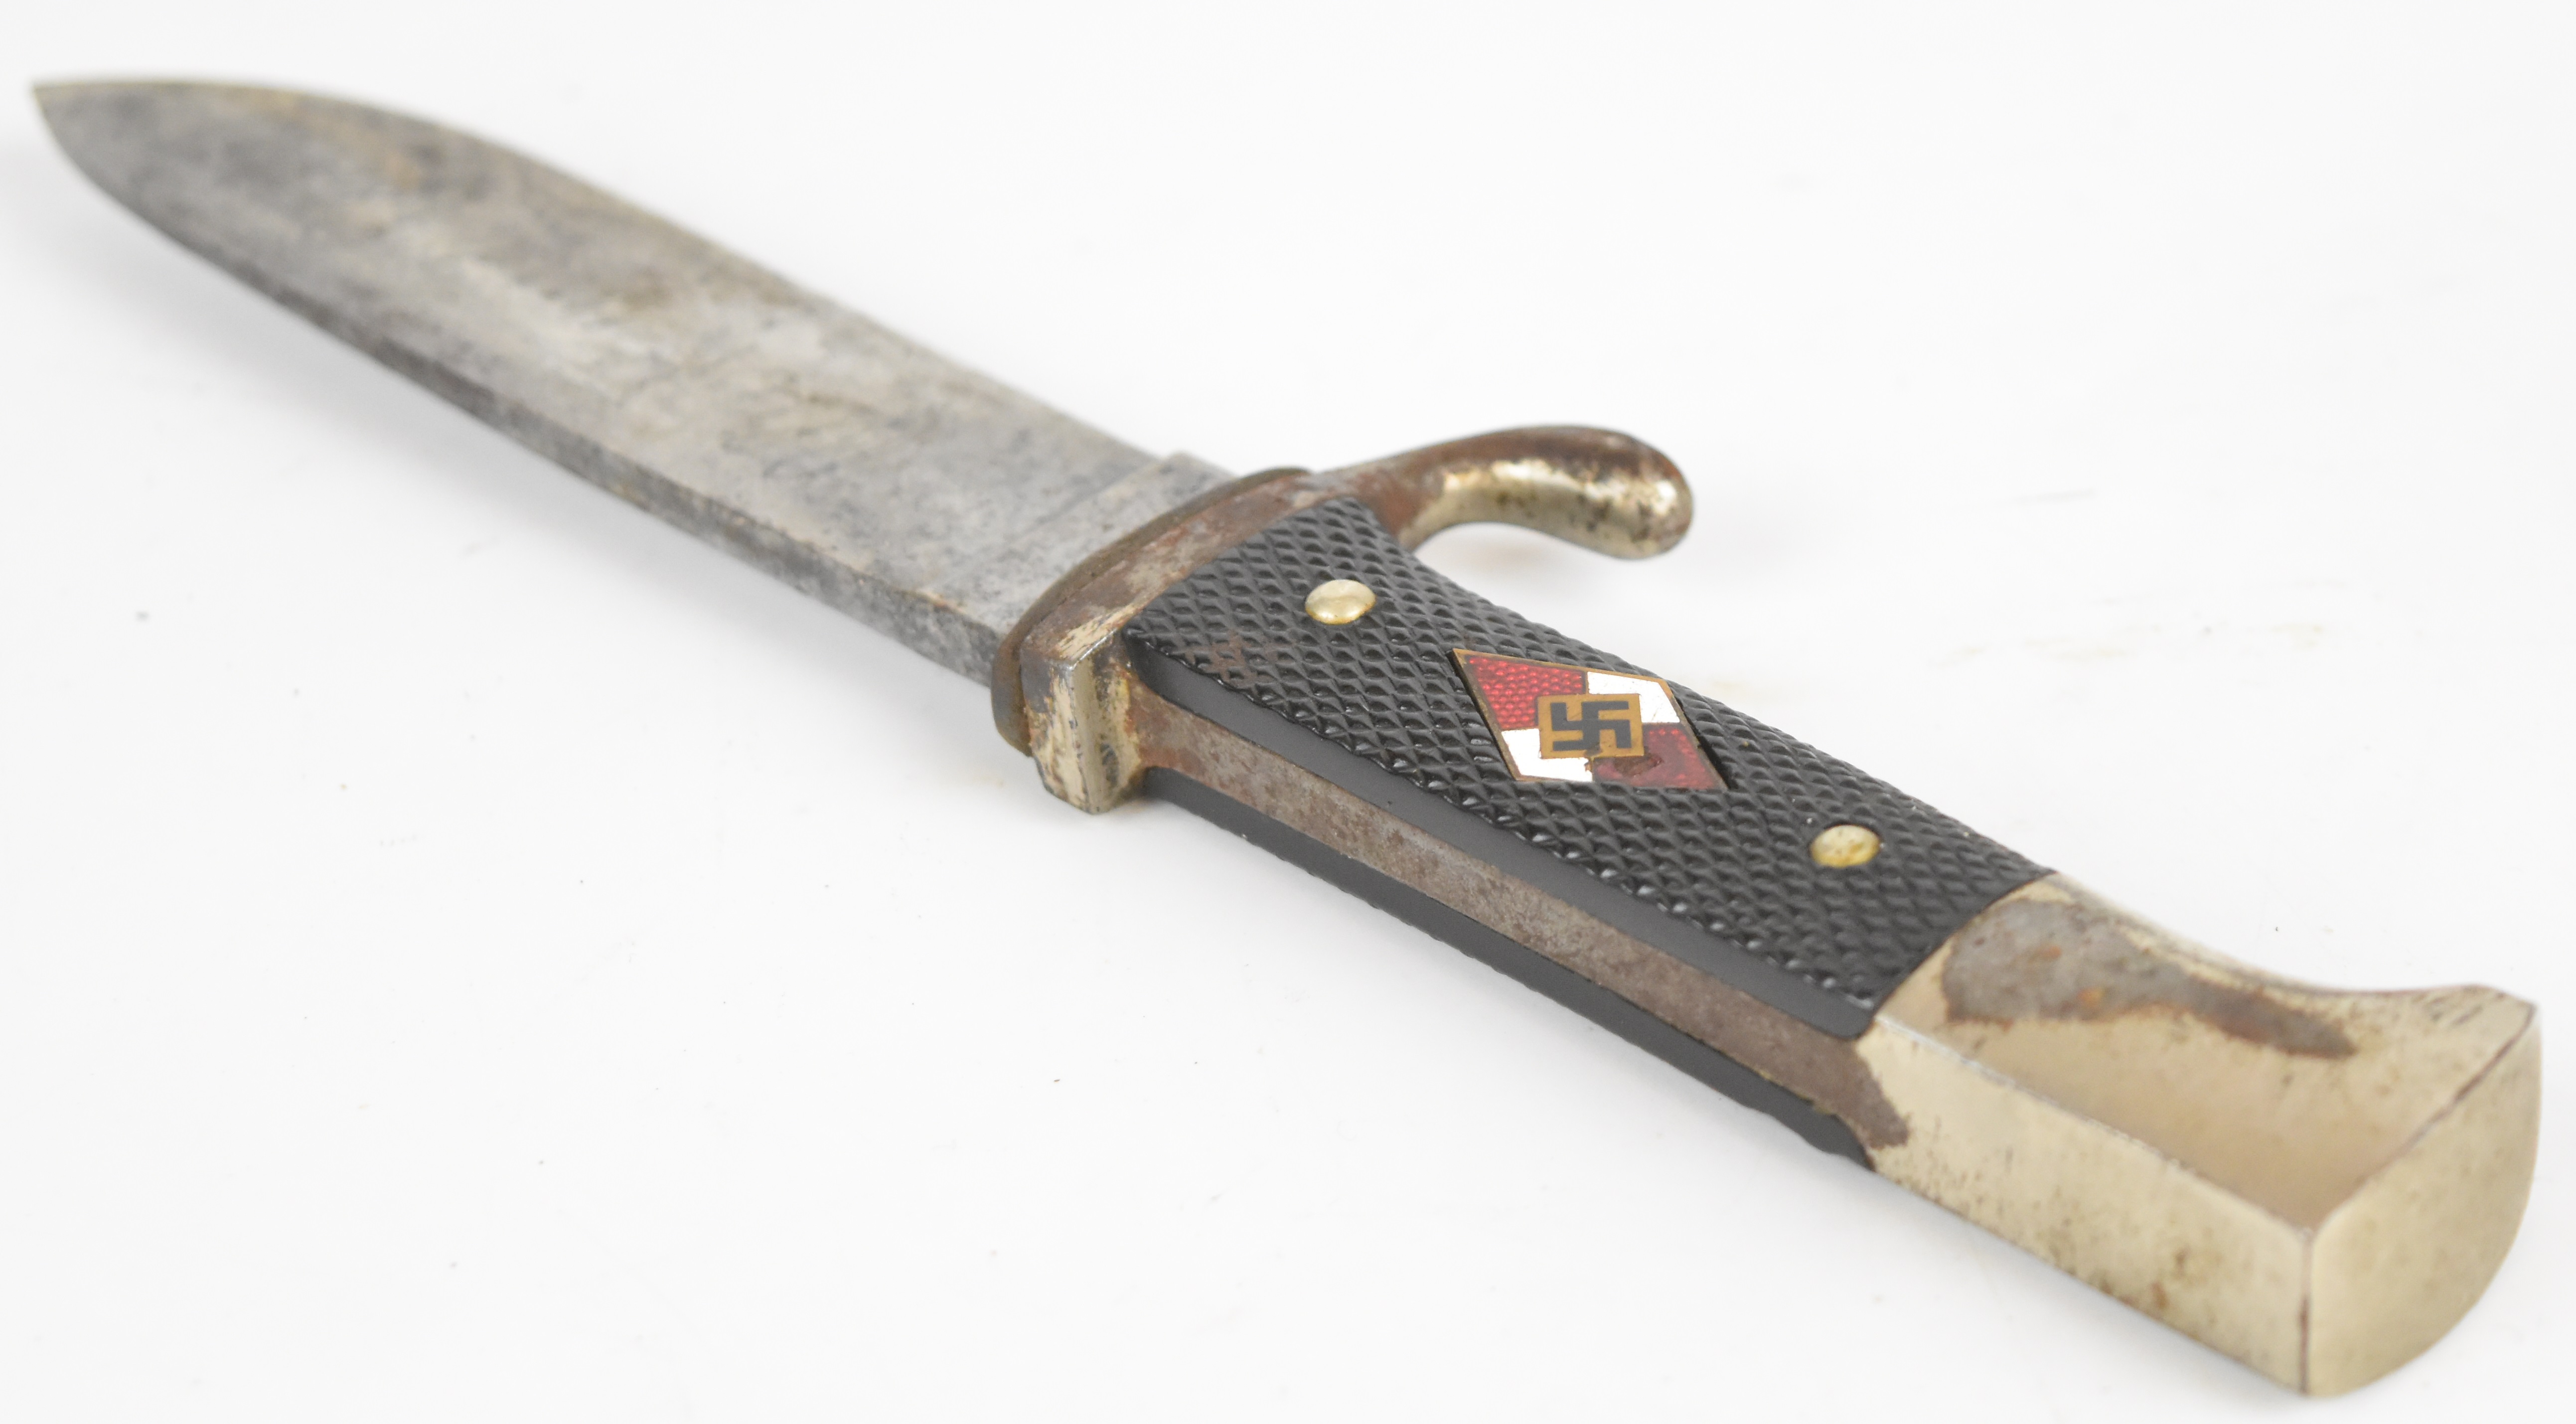 German Nazi Third Reich Hitler Youth dagger with RZM and M7/60 to ricasso, 11.5cm blade, scabbard - Image 3 of 7